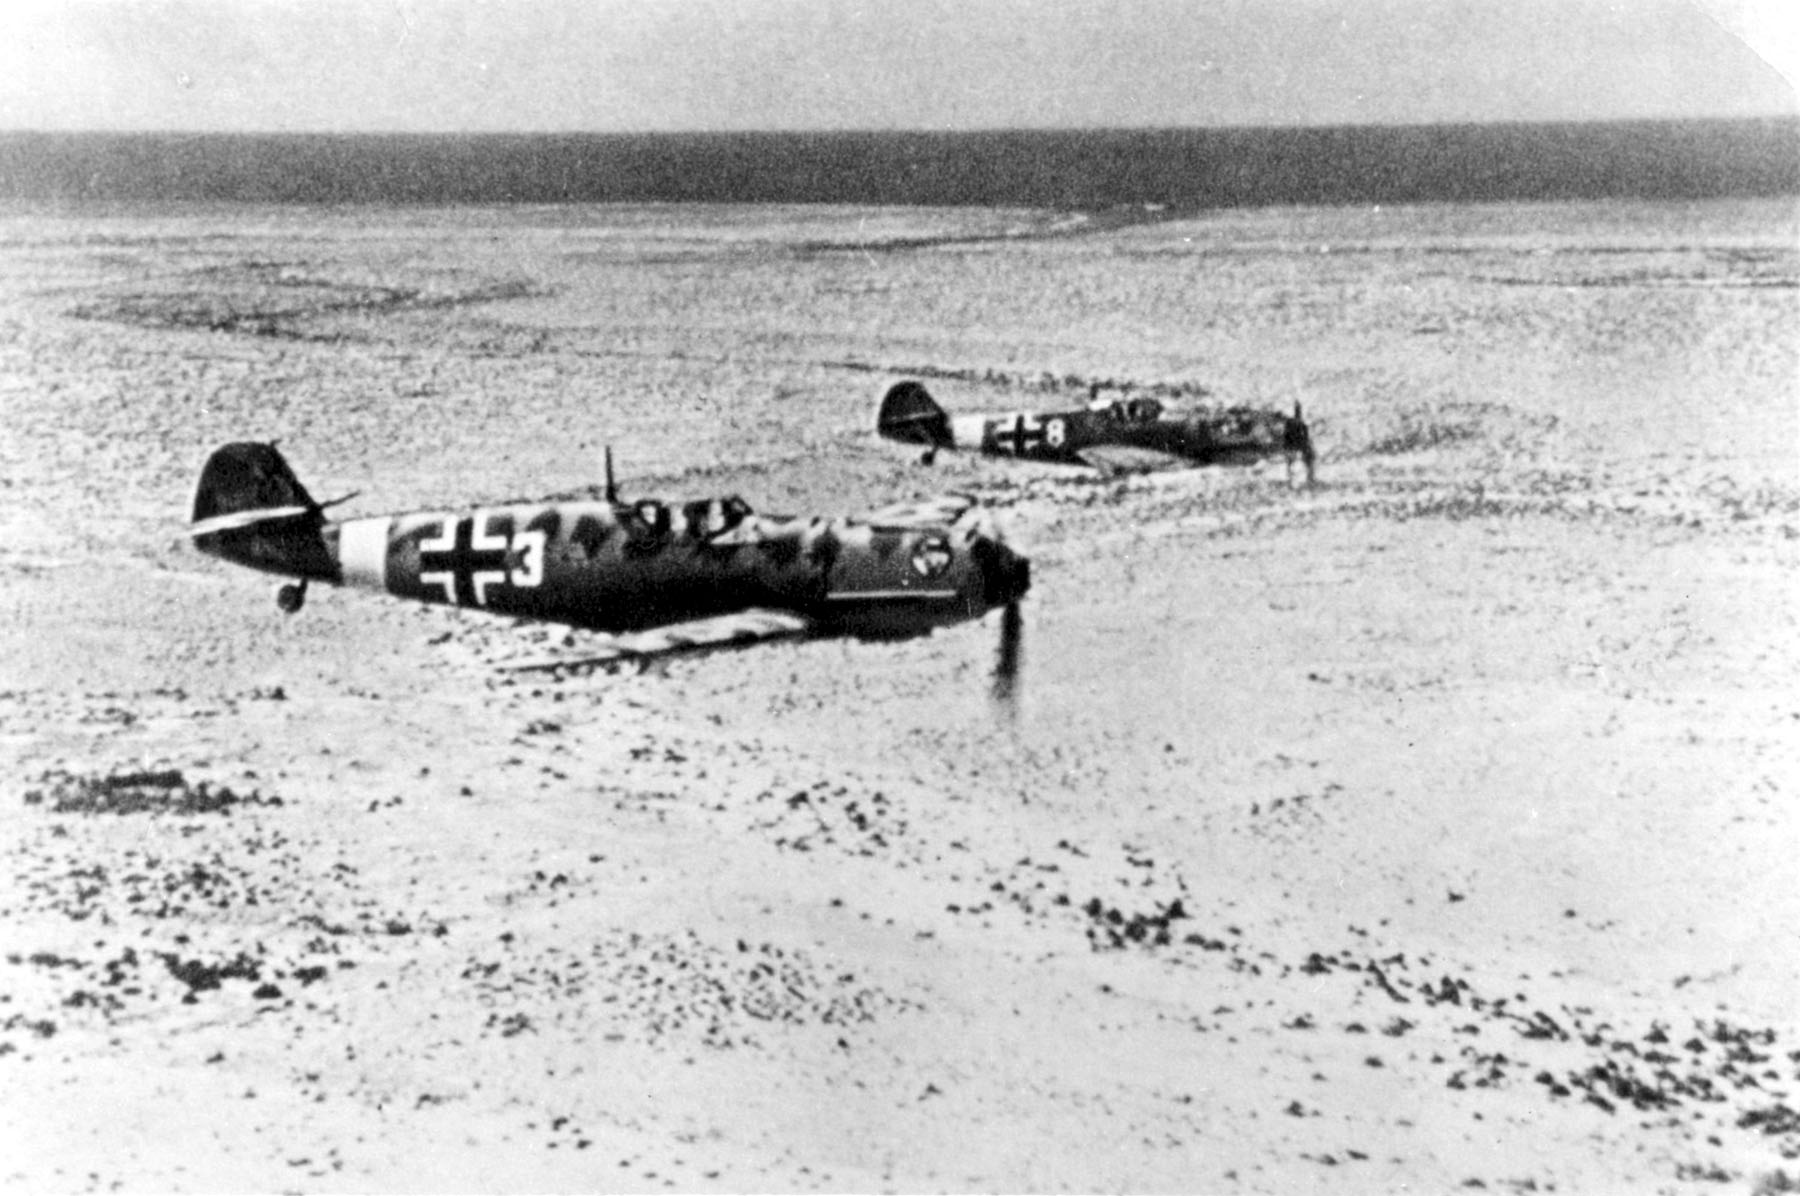 German Bf 109E fighters in flight, North Africa, date unknown